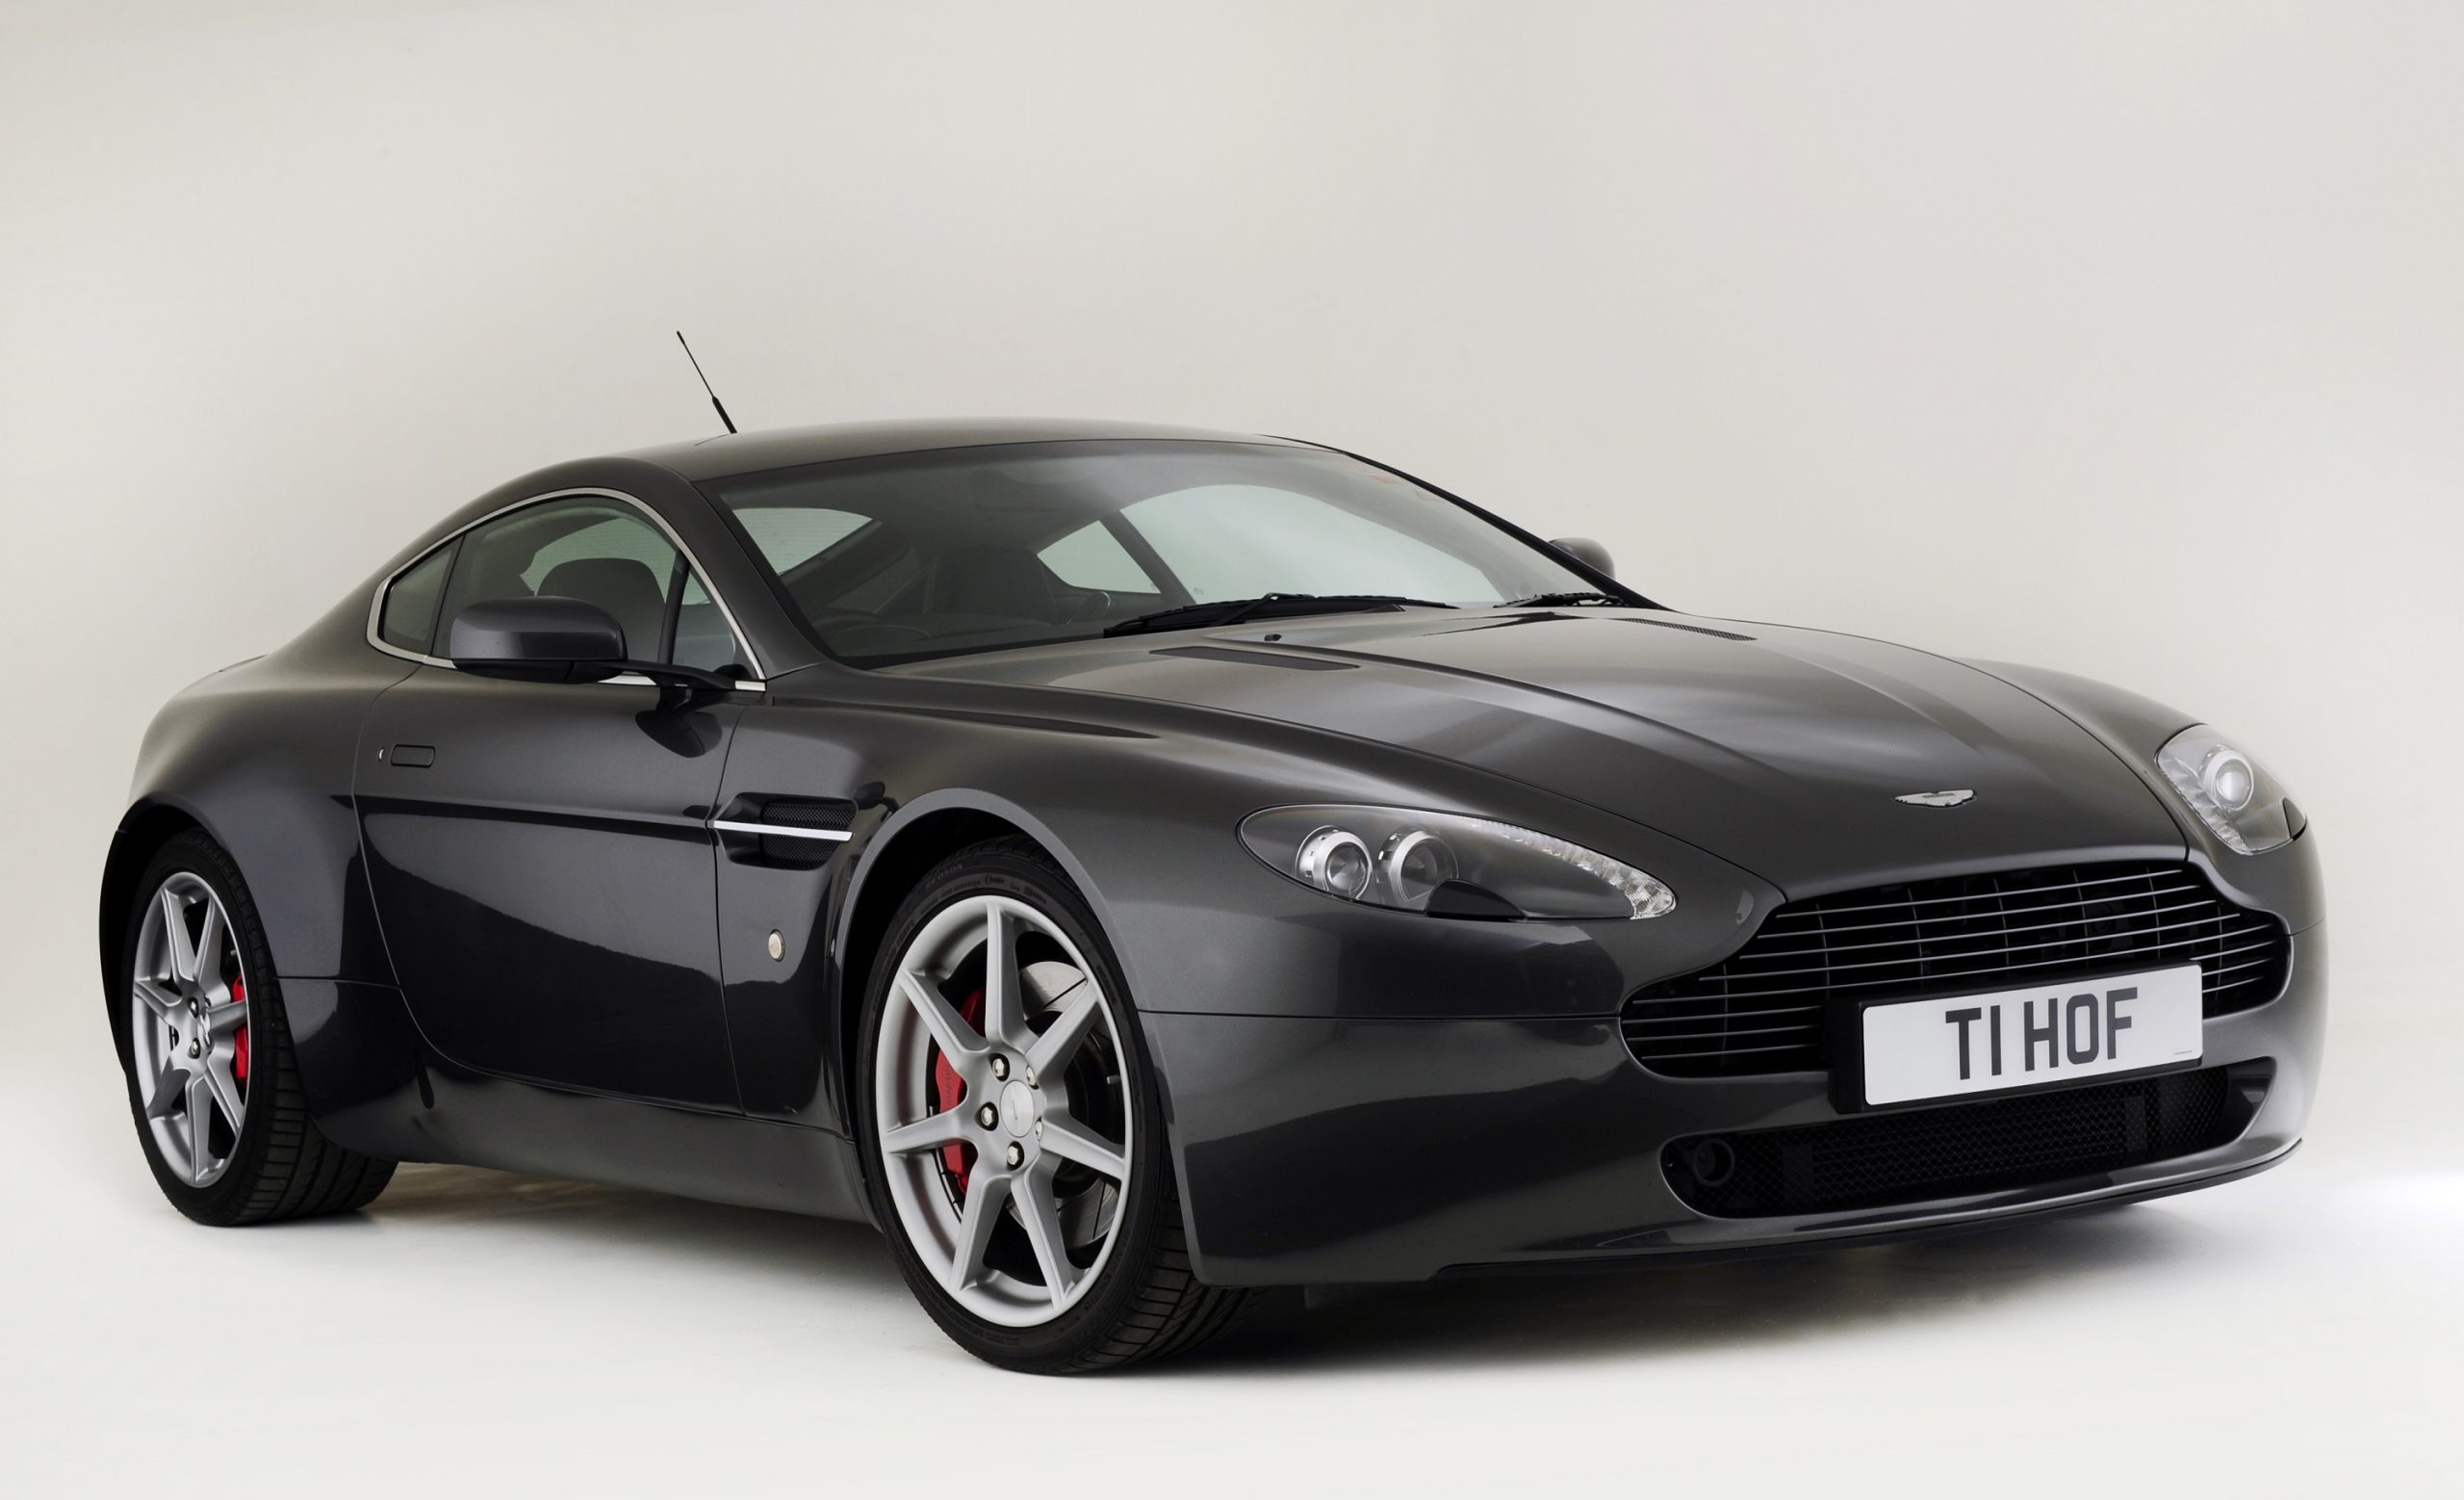 A black Aston Martin Vantage coupe shot from the front 3/4 angle in a studio booth